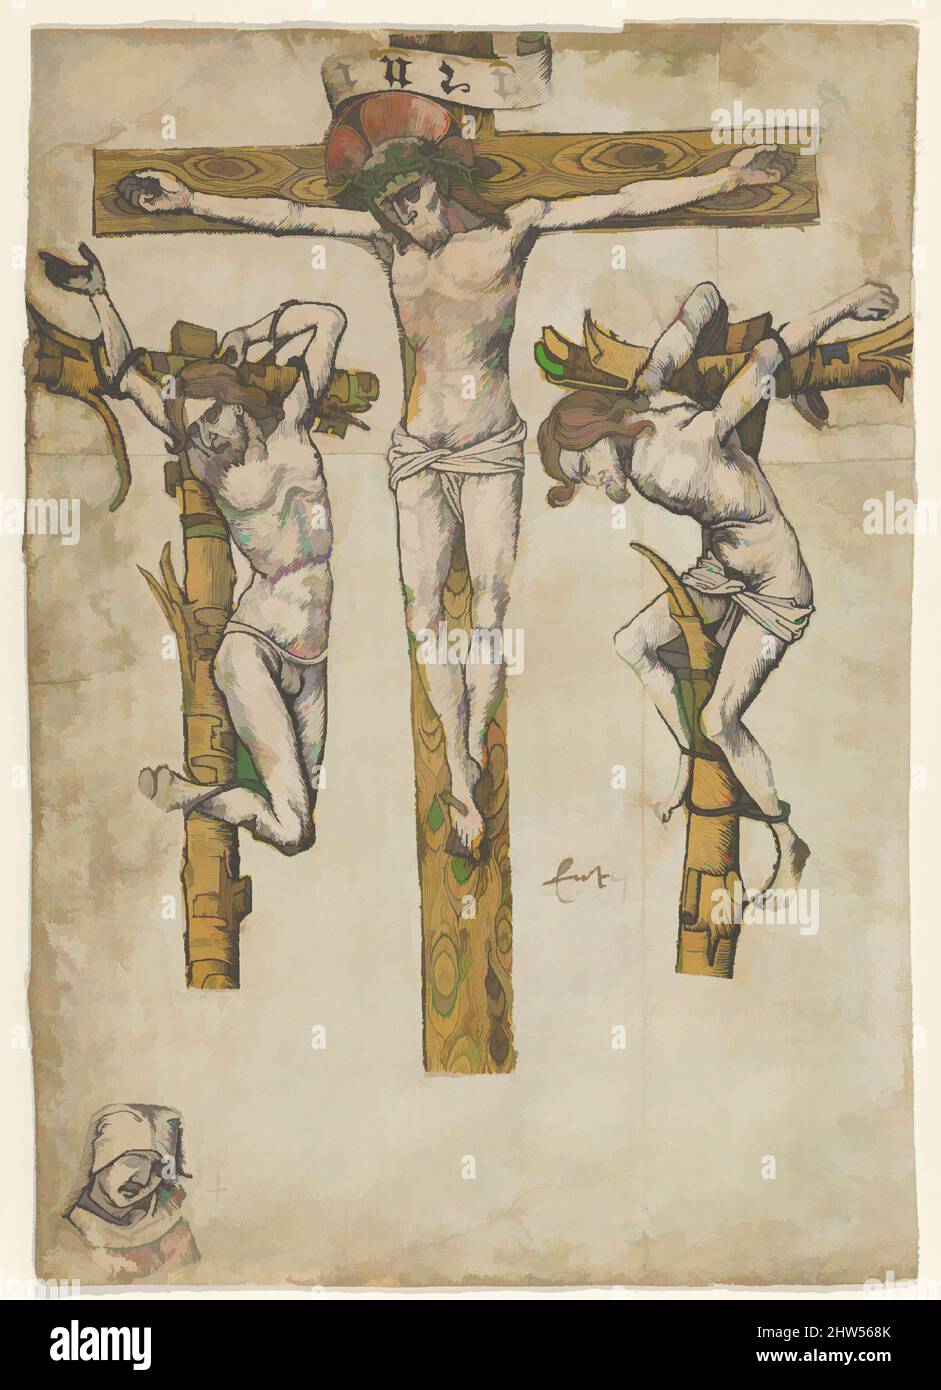 Art inspired by Fragments of a Crucifixion, with the Virgin Mary, ca. 1460–80, Woodcuts, hand-colored, sheet: 10 7/16 x 7 5/16 in. (26.5 x 18.6 cm), Prints, Classic works modernized by Artotop with a splash of modernity. Shapes, color and value, eye-catching visual impact on art. Emotions through freedom of artworks in a contemporary way. A timeless message pursuing a wildly creative new direction. Artists turning to the digital medium and creating the Artotop NFT Stock Photo